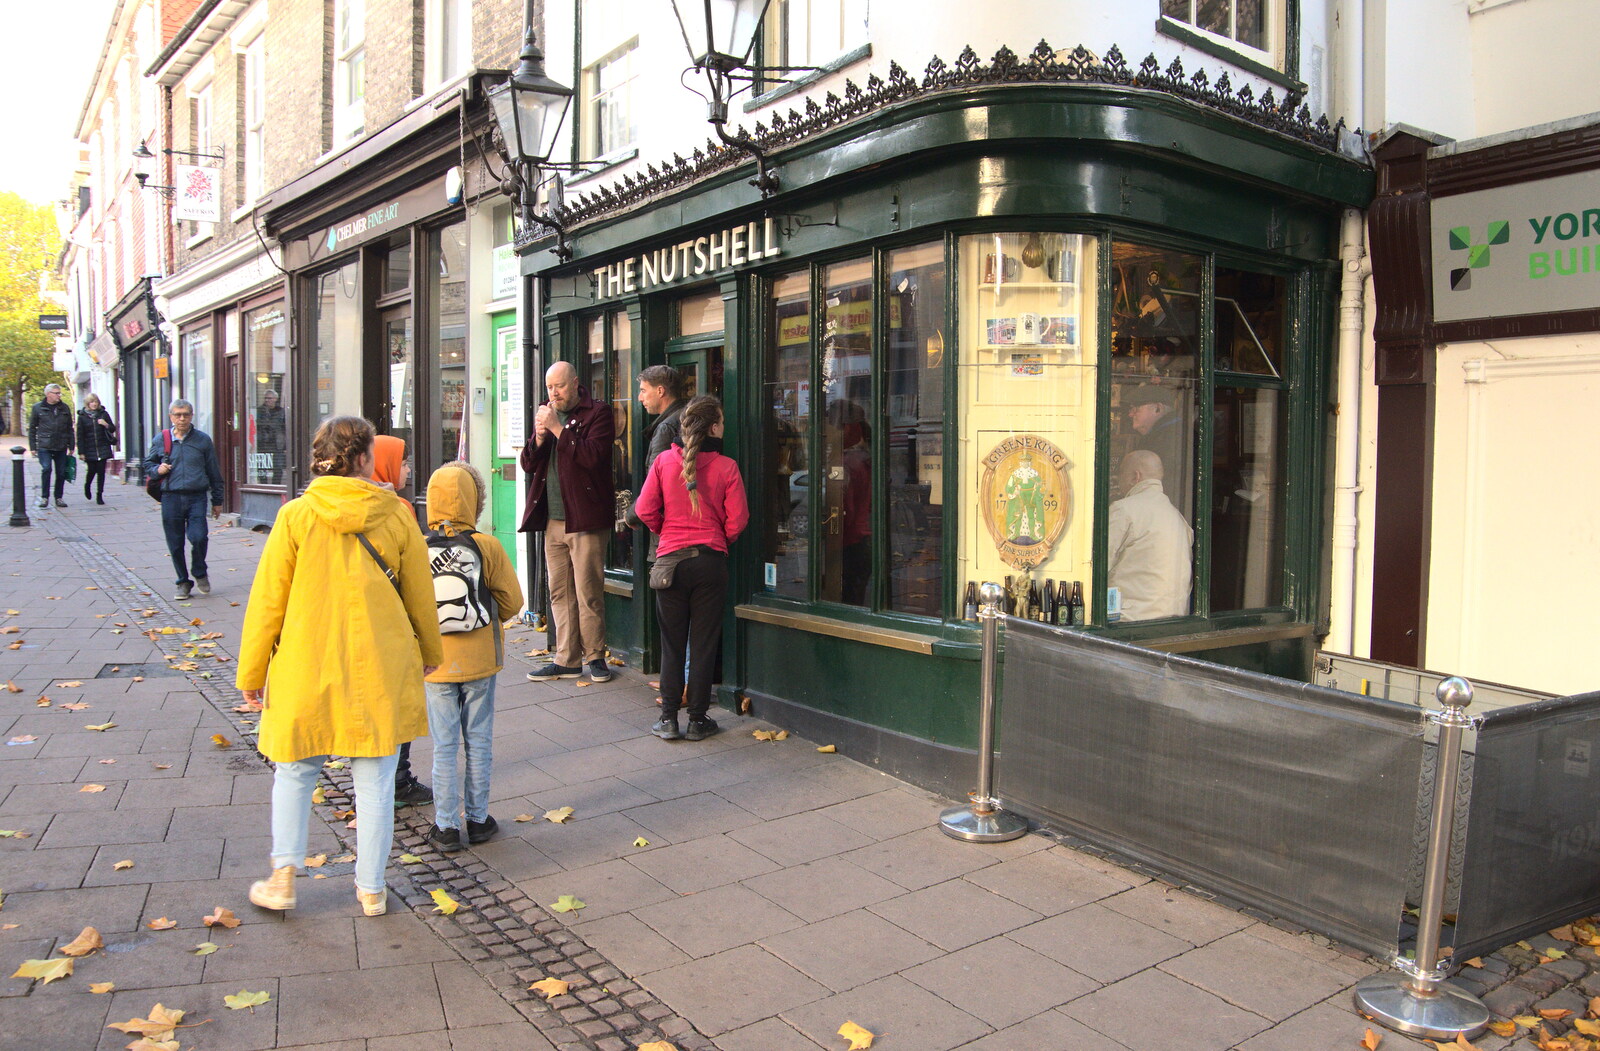 Pizza and Pasta in Bury St. Edmunds, Suffolk - 30th October 2022: The Nutshell - one of the smallest pubs in England